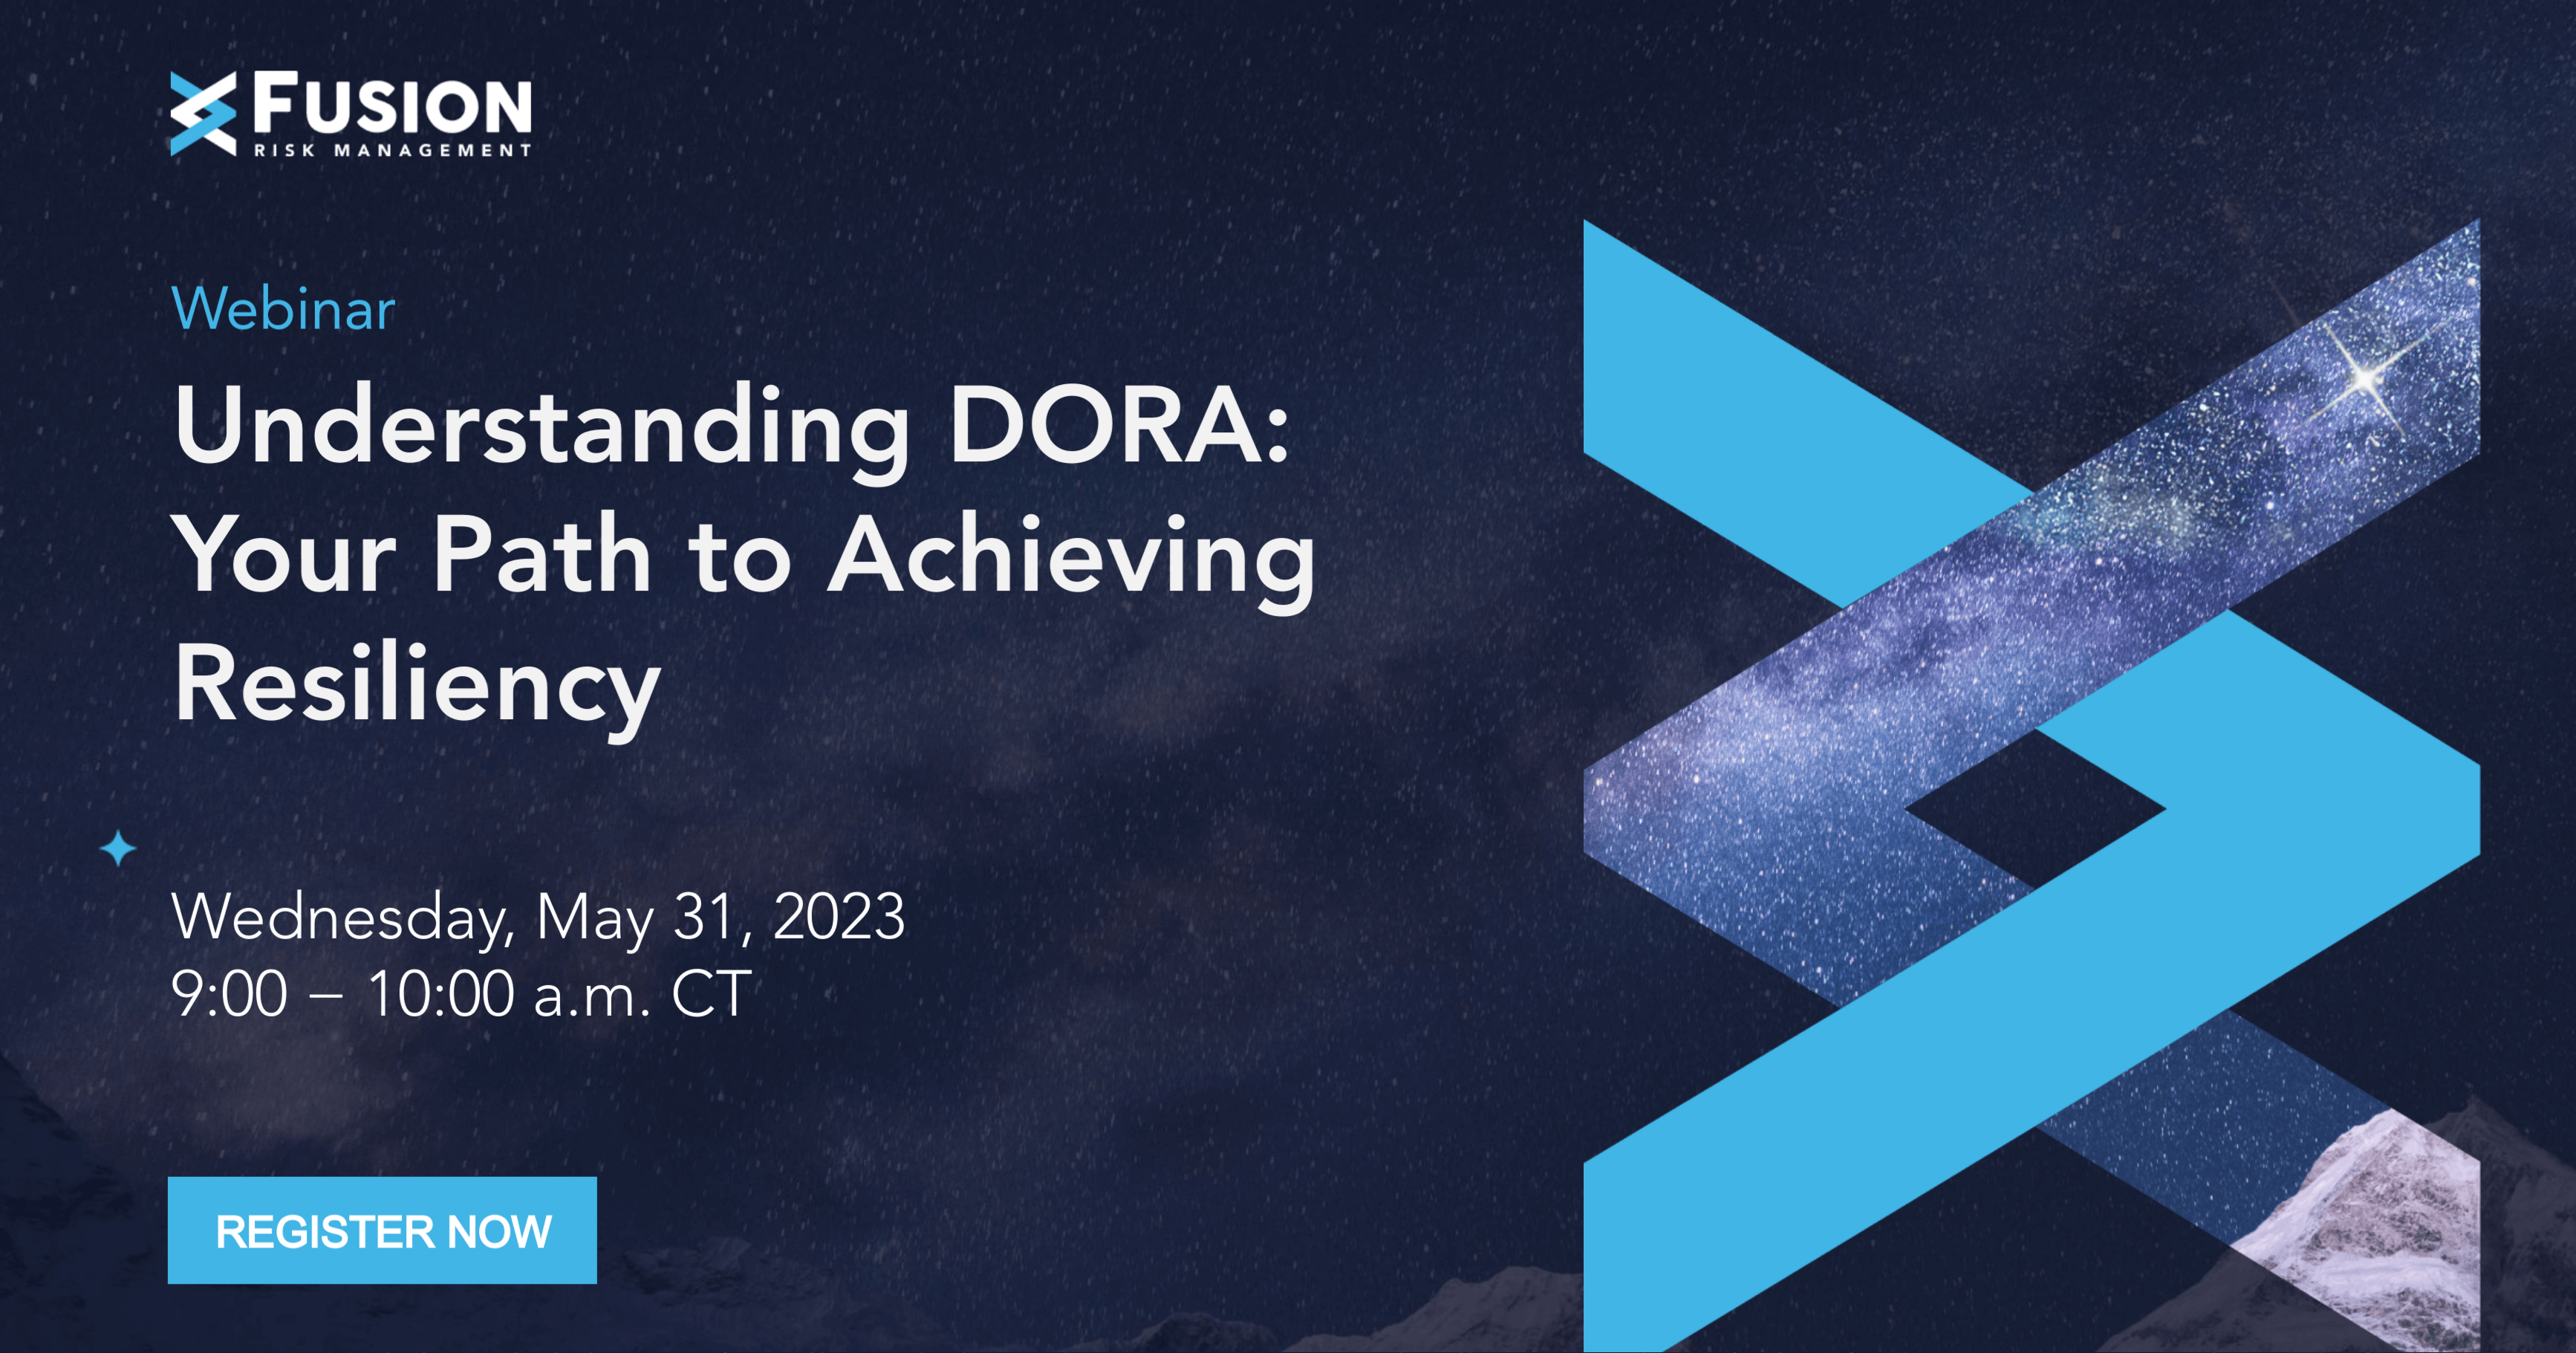 Webinar - Understanding DORA - Your Path to Achieving Resiliency Social Card